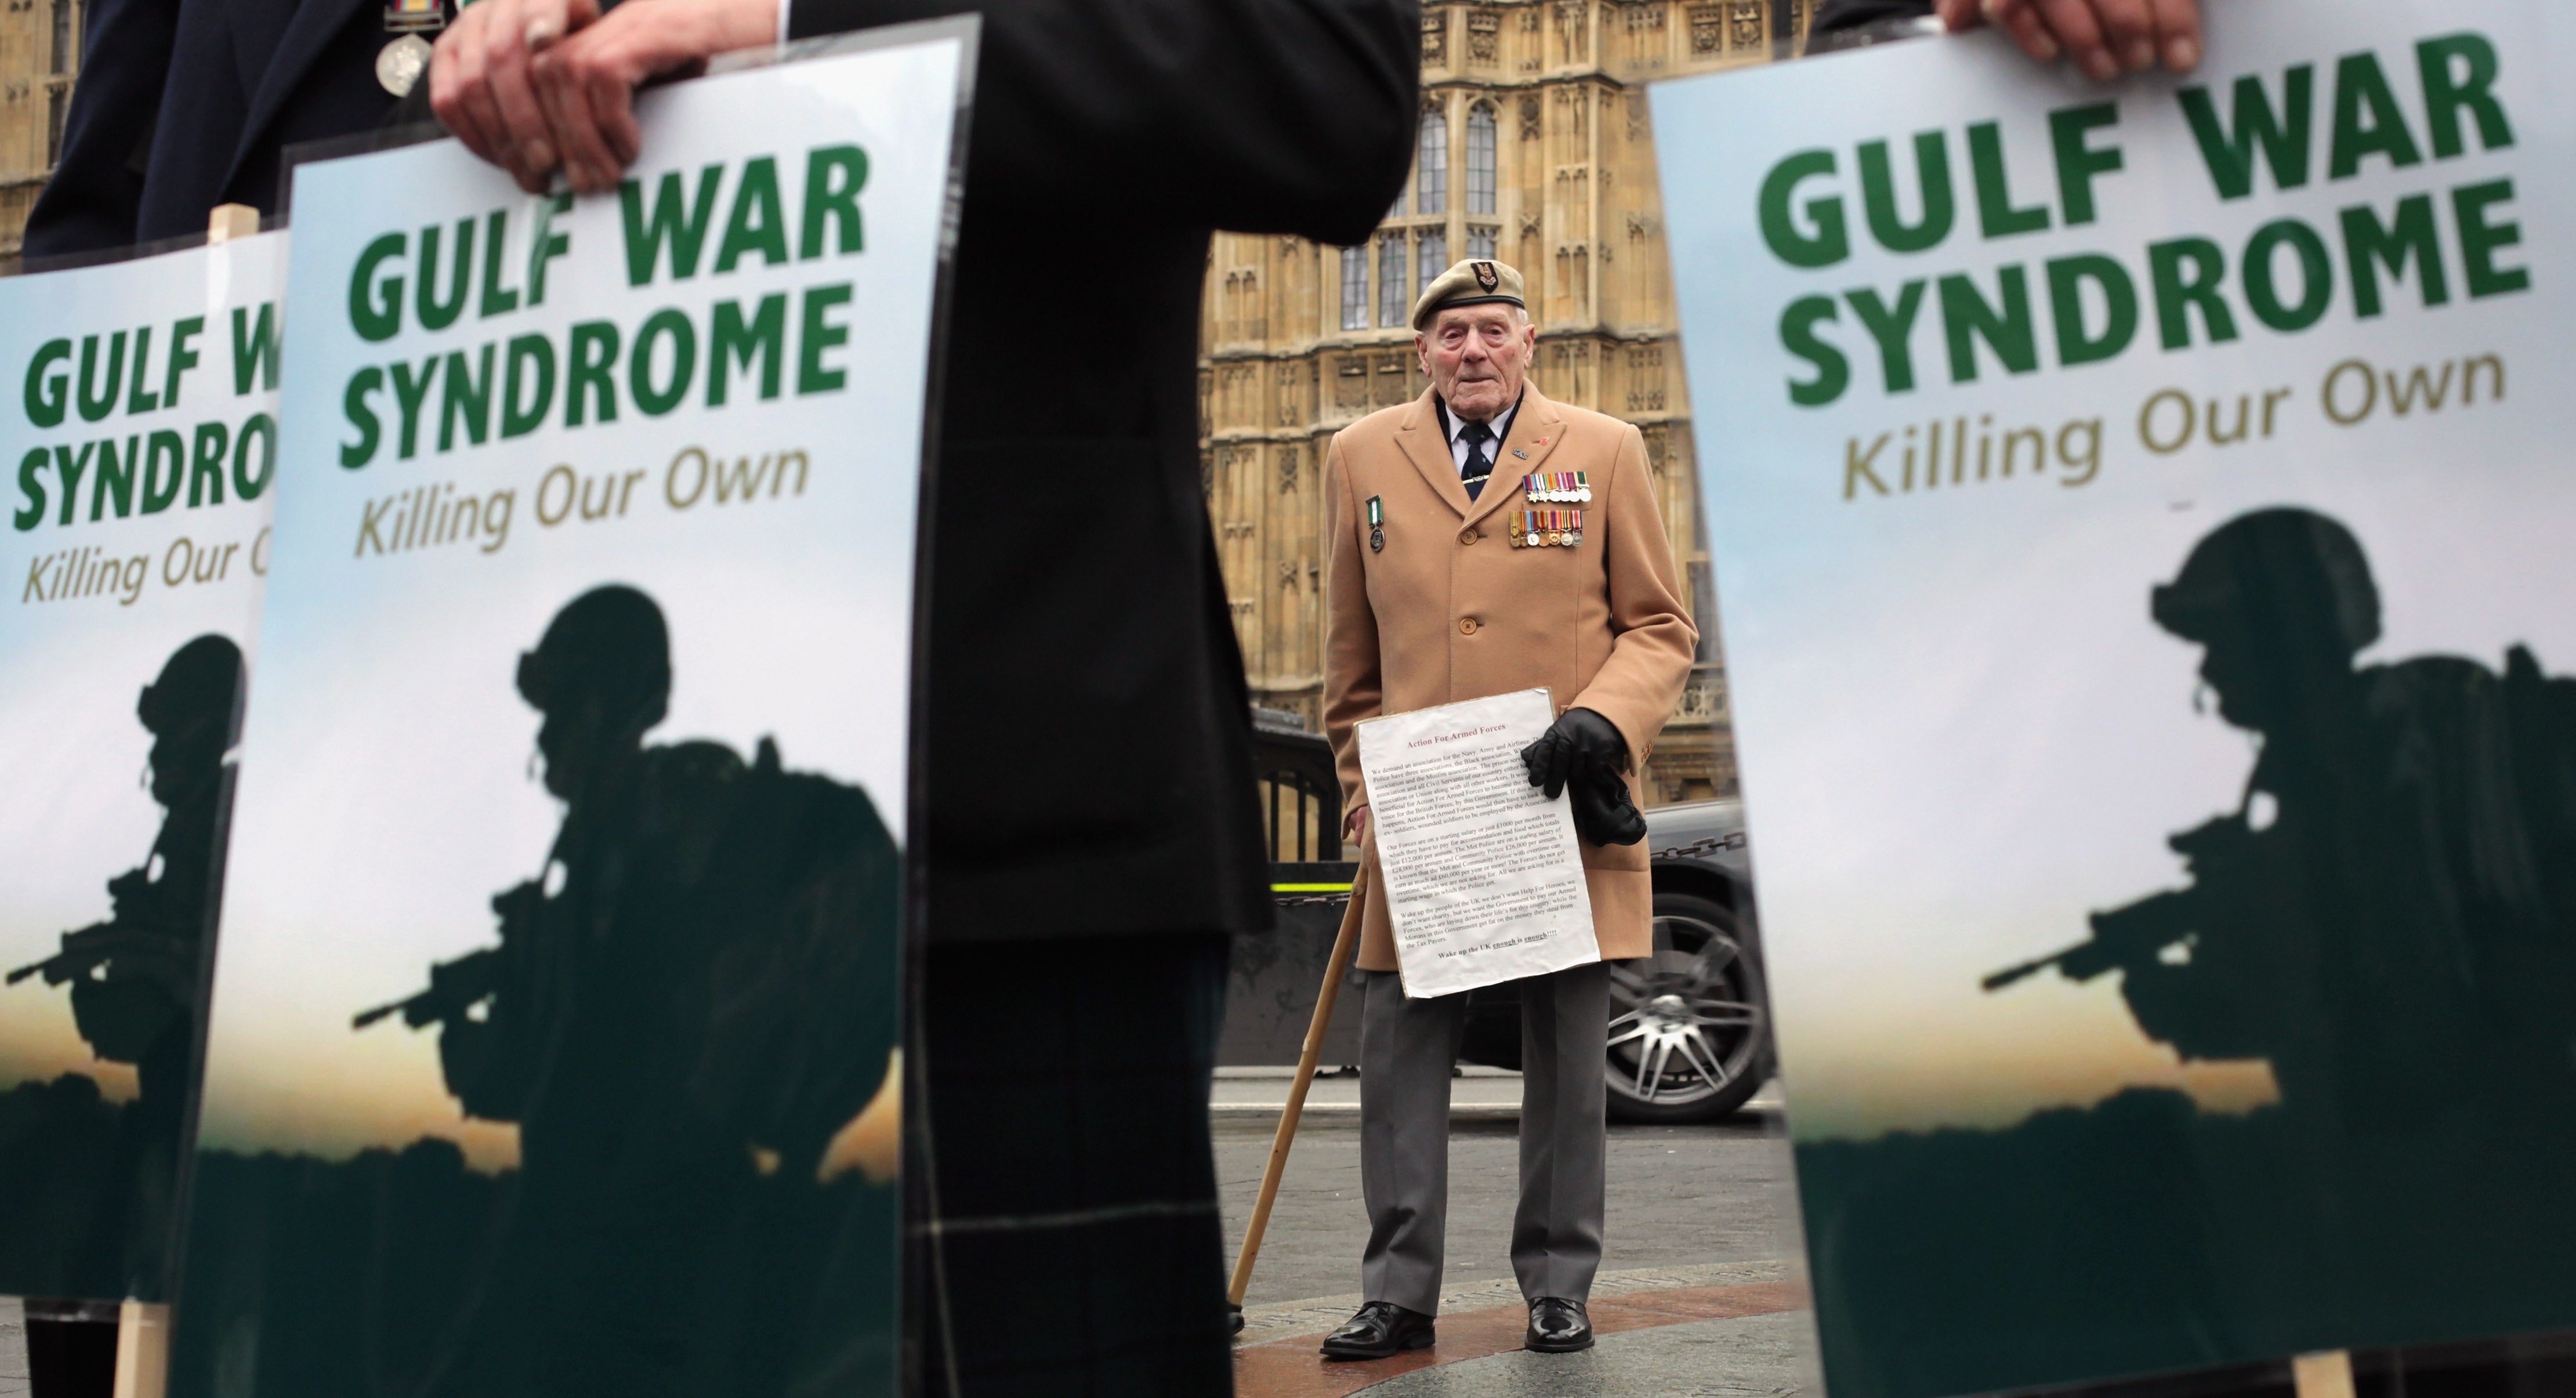 War veterans protest in London to mark the 20th anniversary of the end of the Gulf War on 28 February 2011